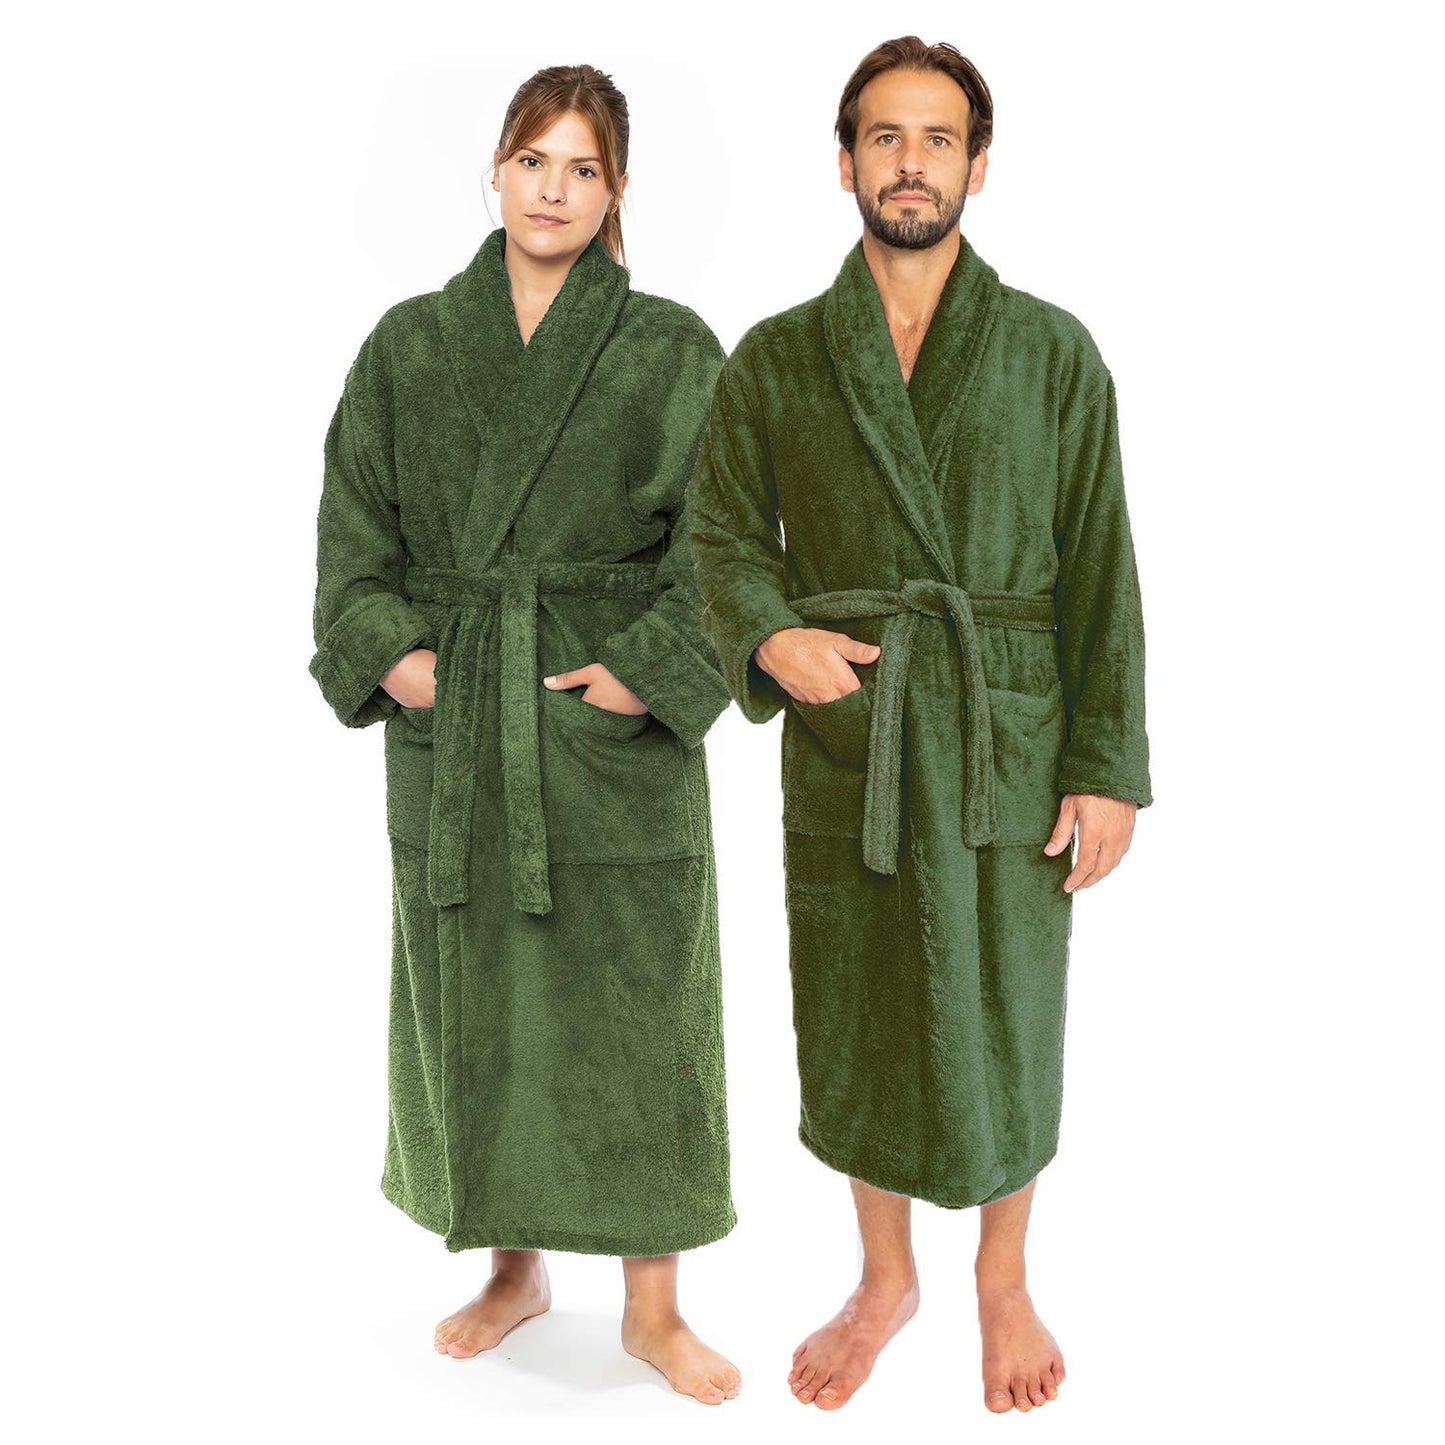 Classic Turkish Combed Cotton Luxurious Thick Unisex Bathrobes - Classic Turkish Towels